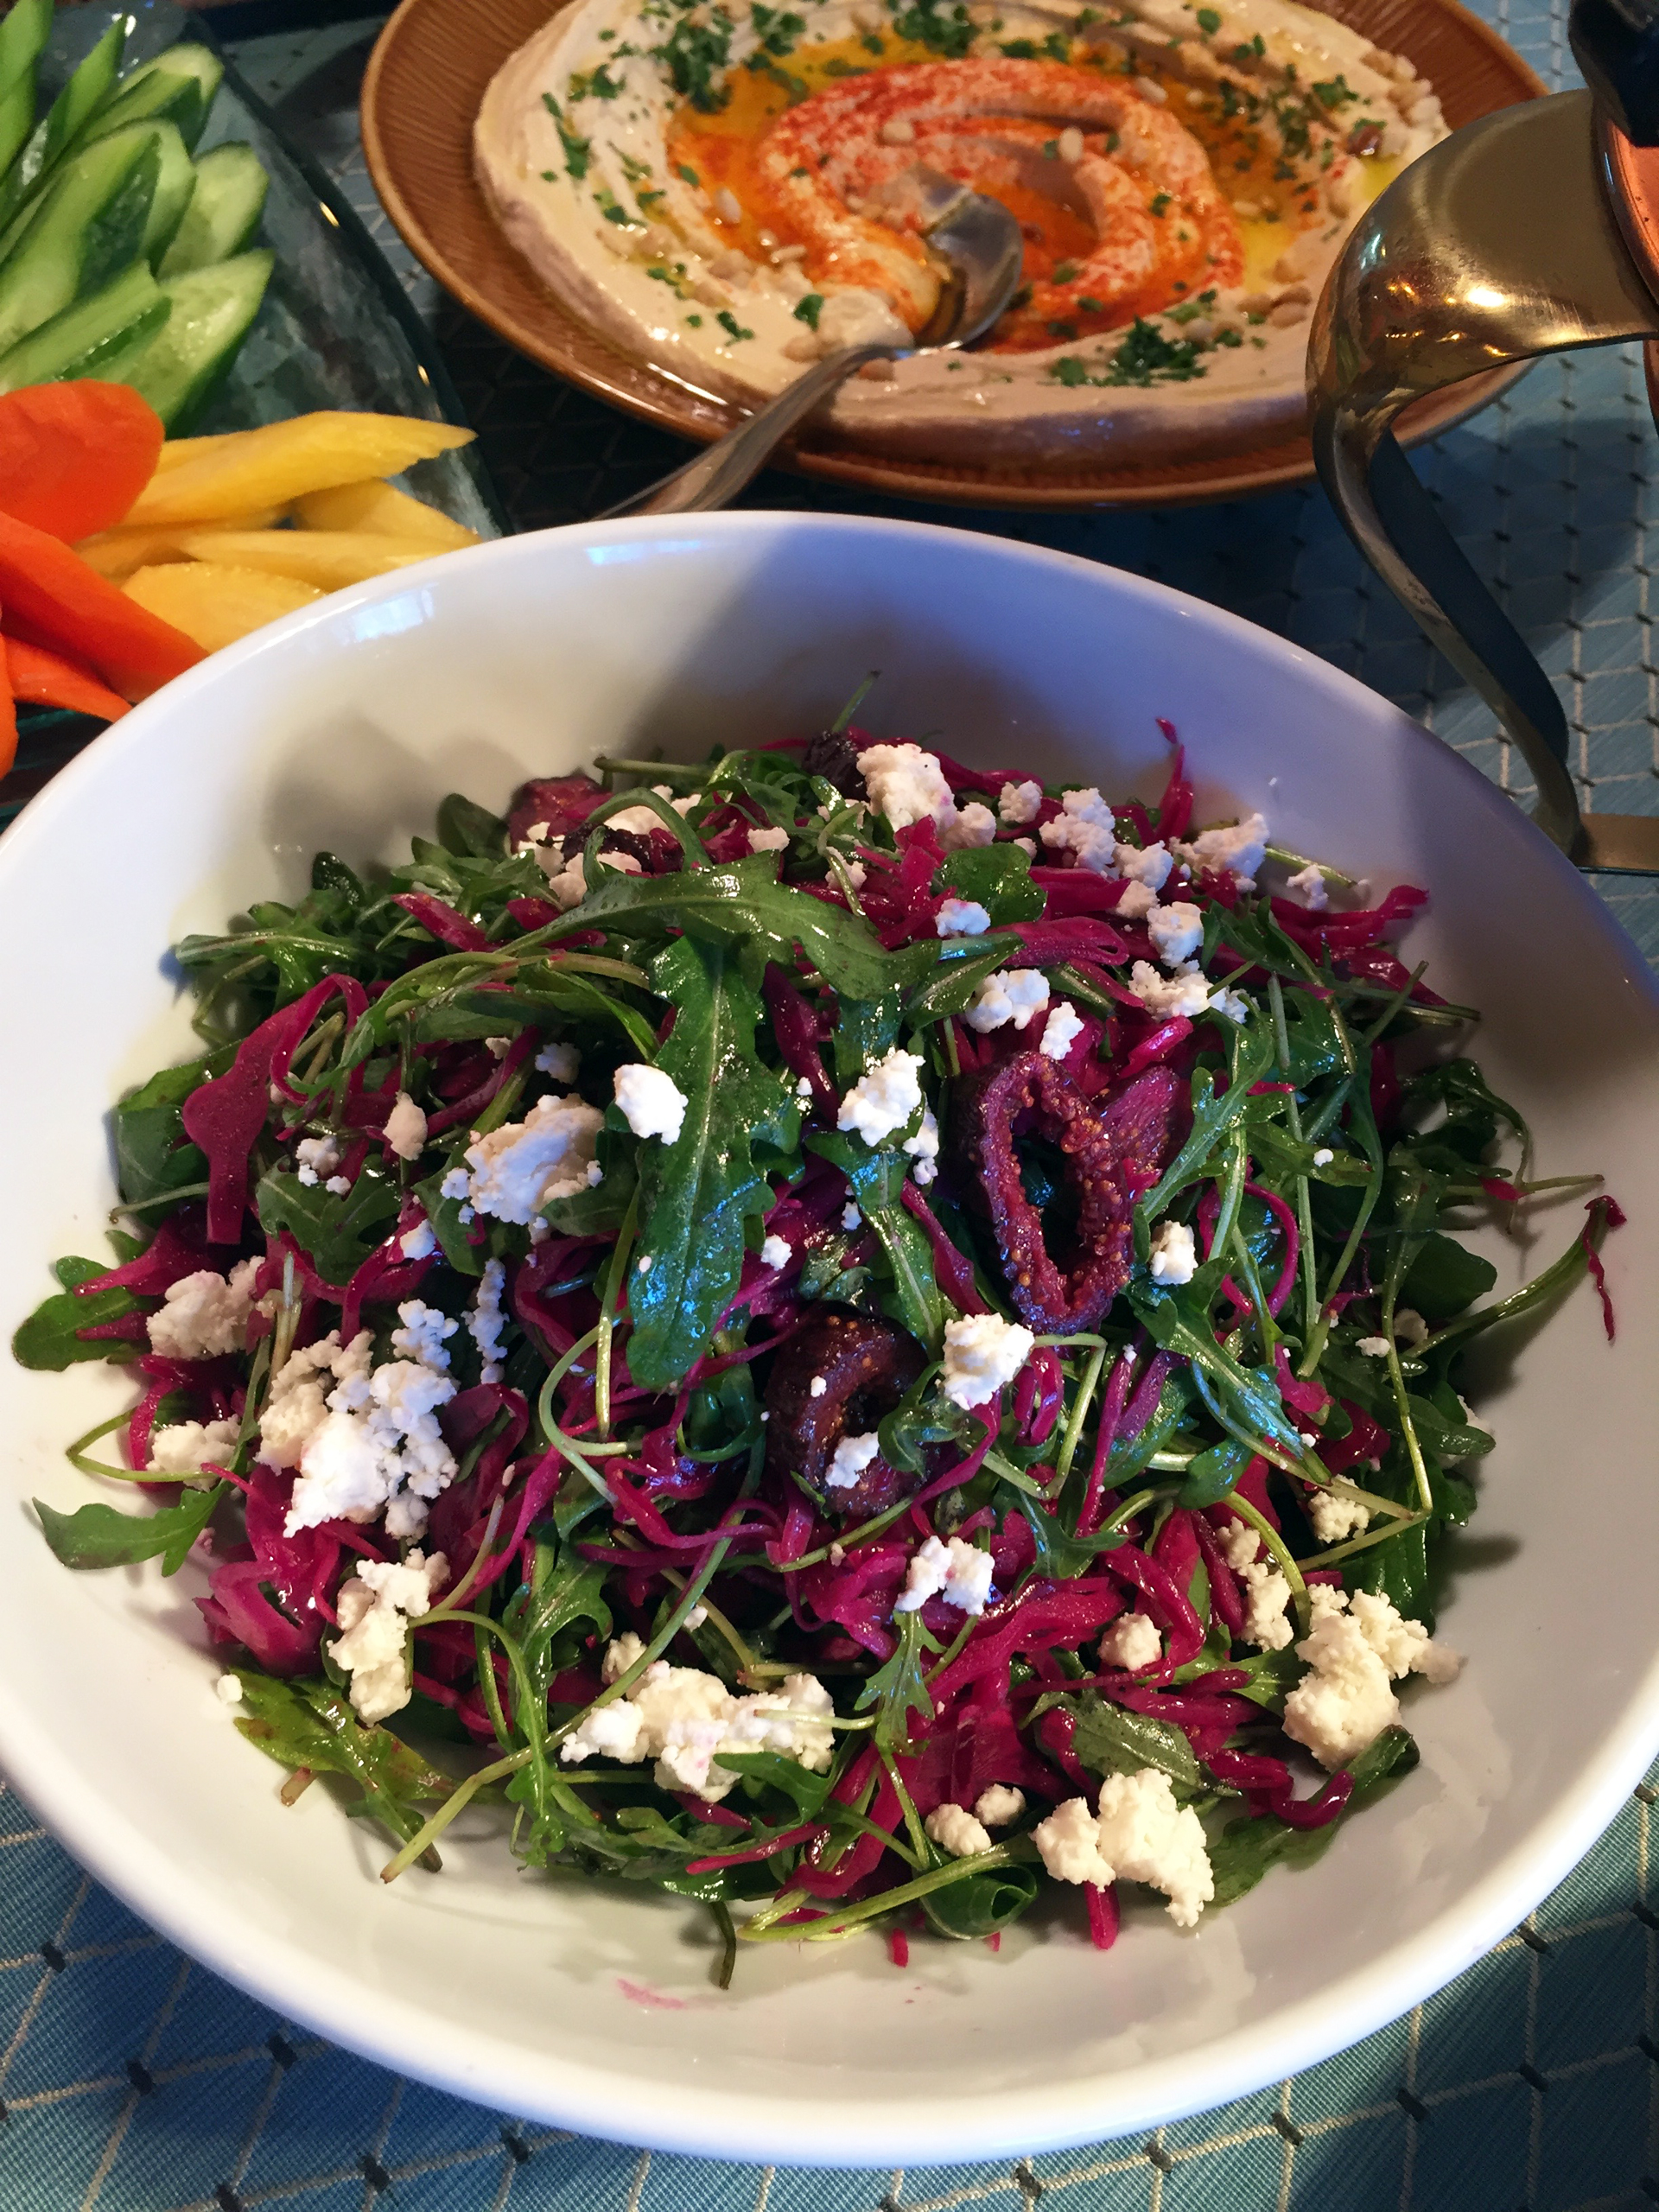 One of Ba-Bite's colorful salads: red cabbage with mung bean sprouts, dried figs, arugula and feta and the creamiest hummus.